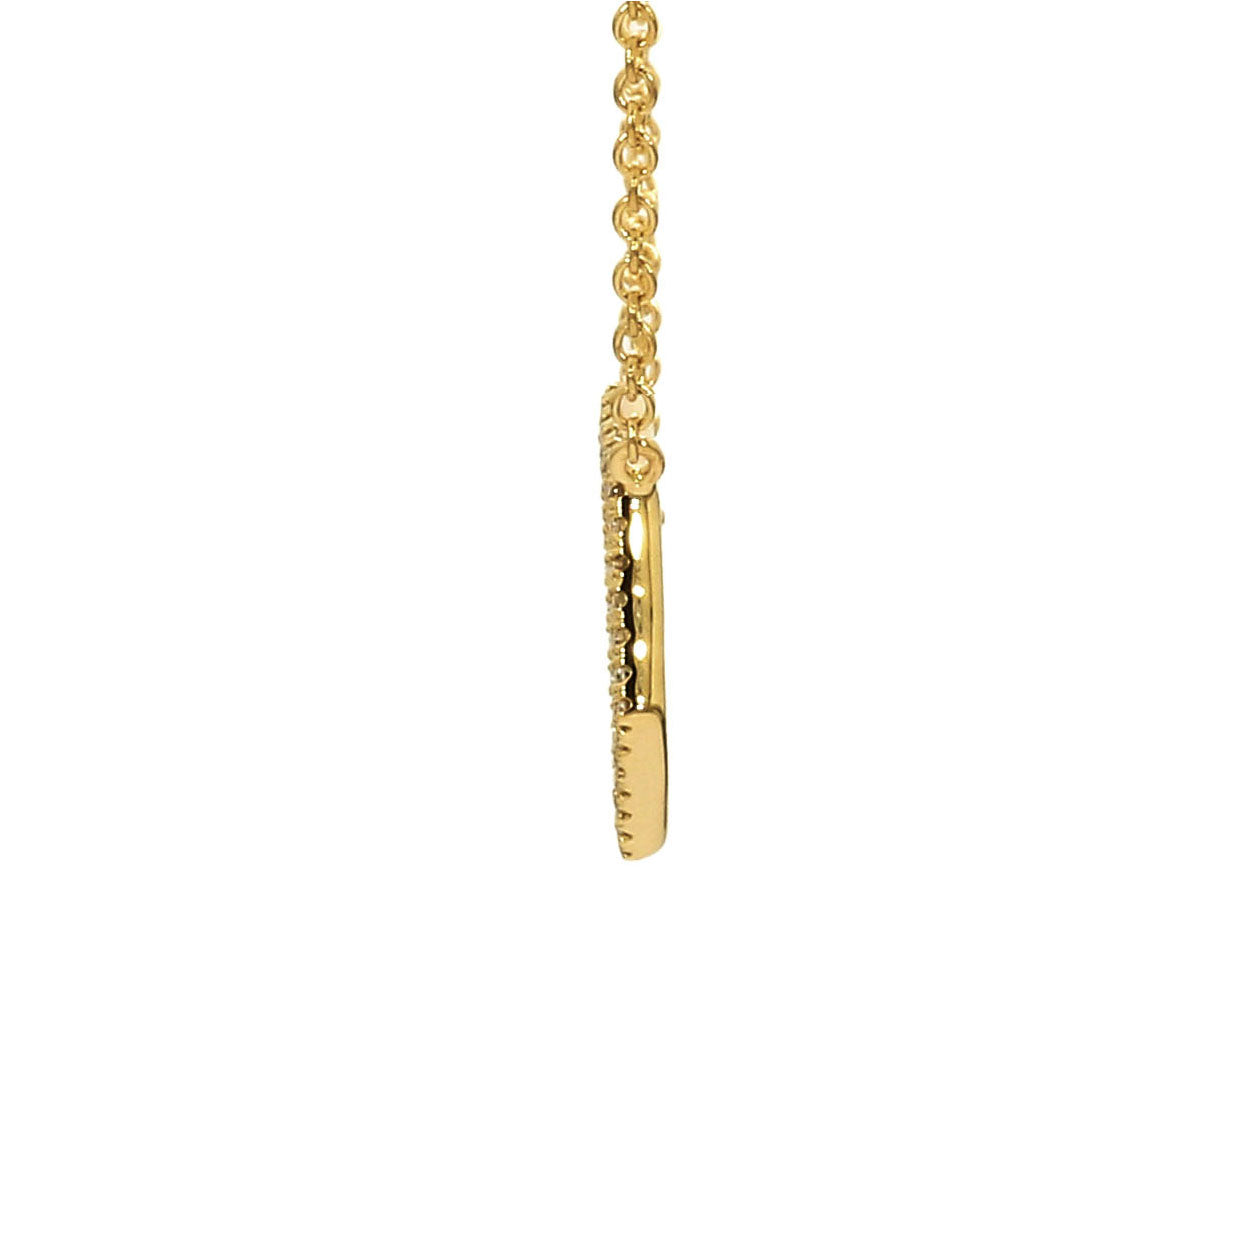 Adamar Jewels LUZ Nube Necklace in 18K yellow gold set with diamonds